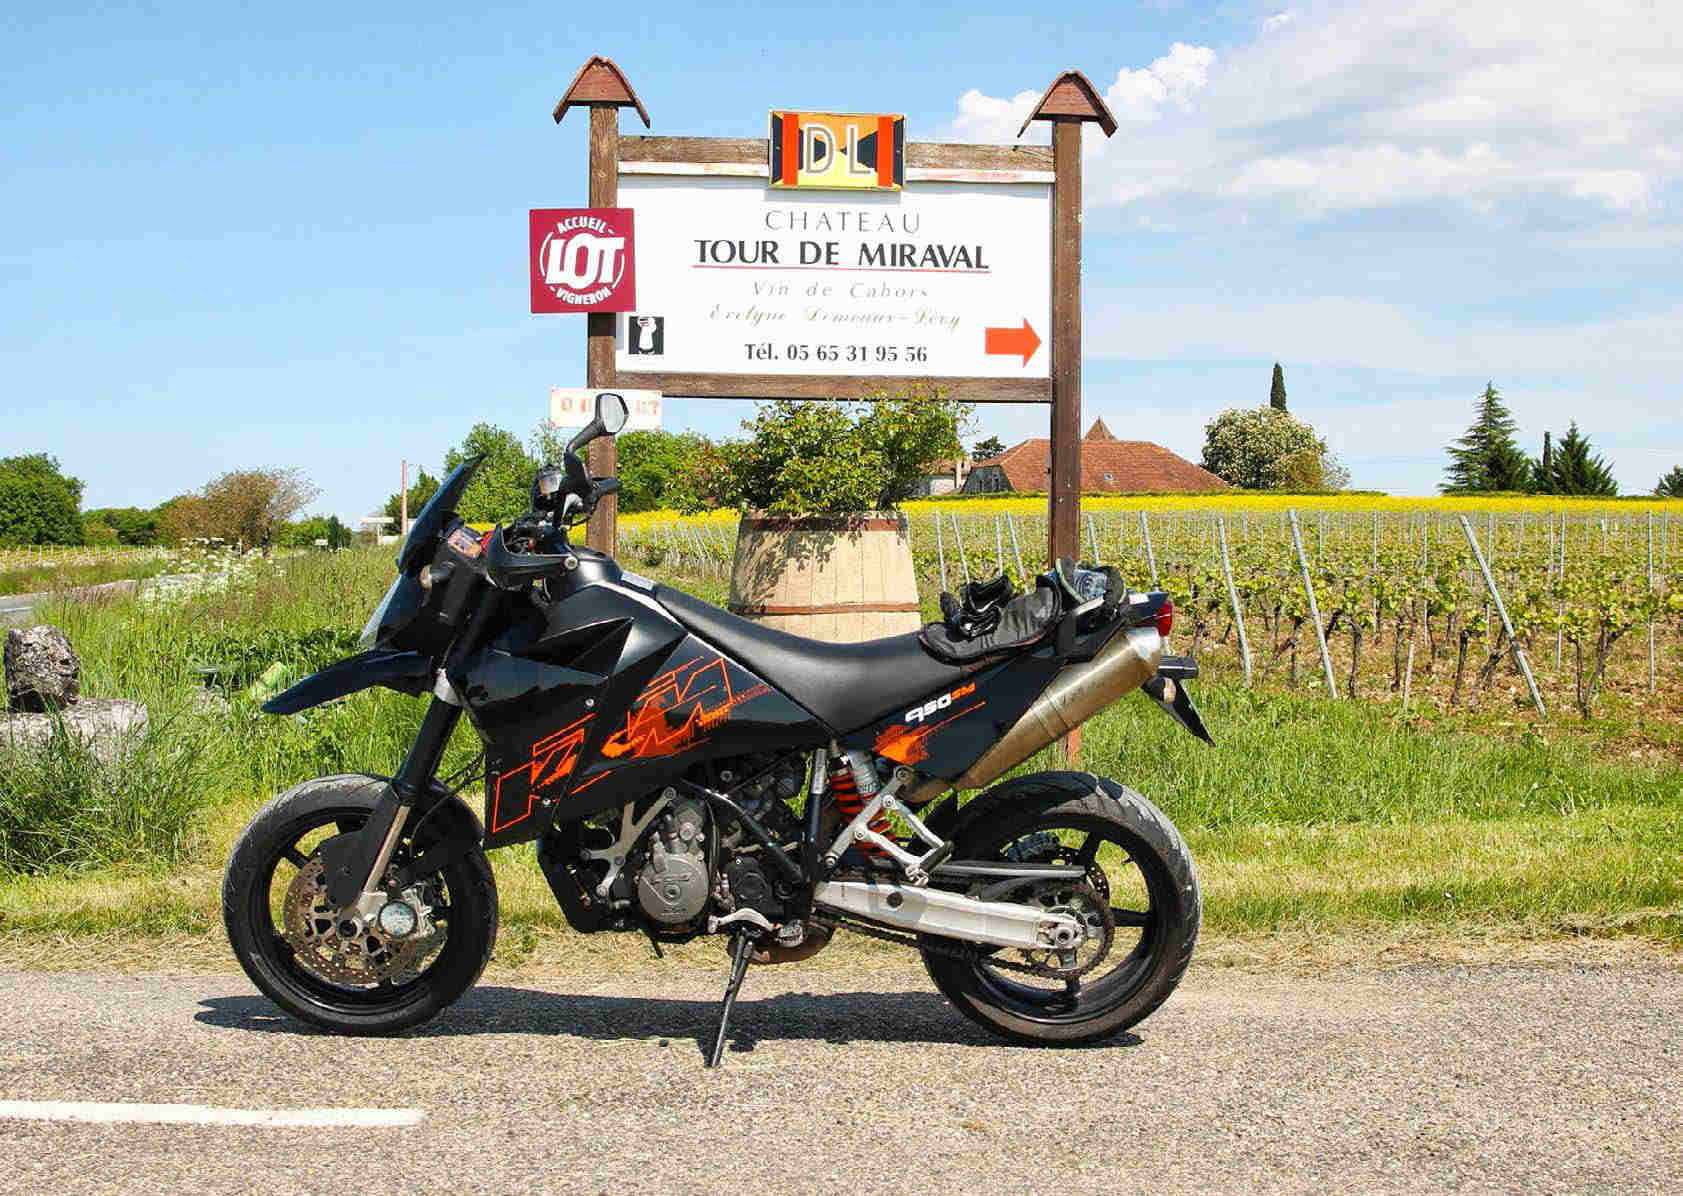 Side view of the KTM, parked on the road, below a sign for the Chateau Tour De Miraval